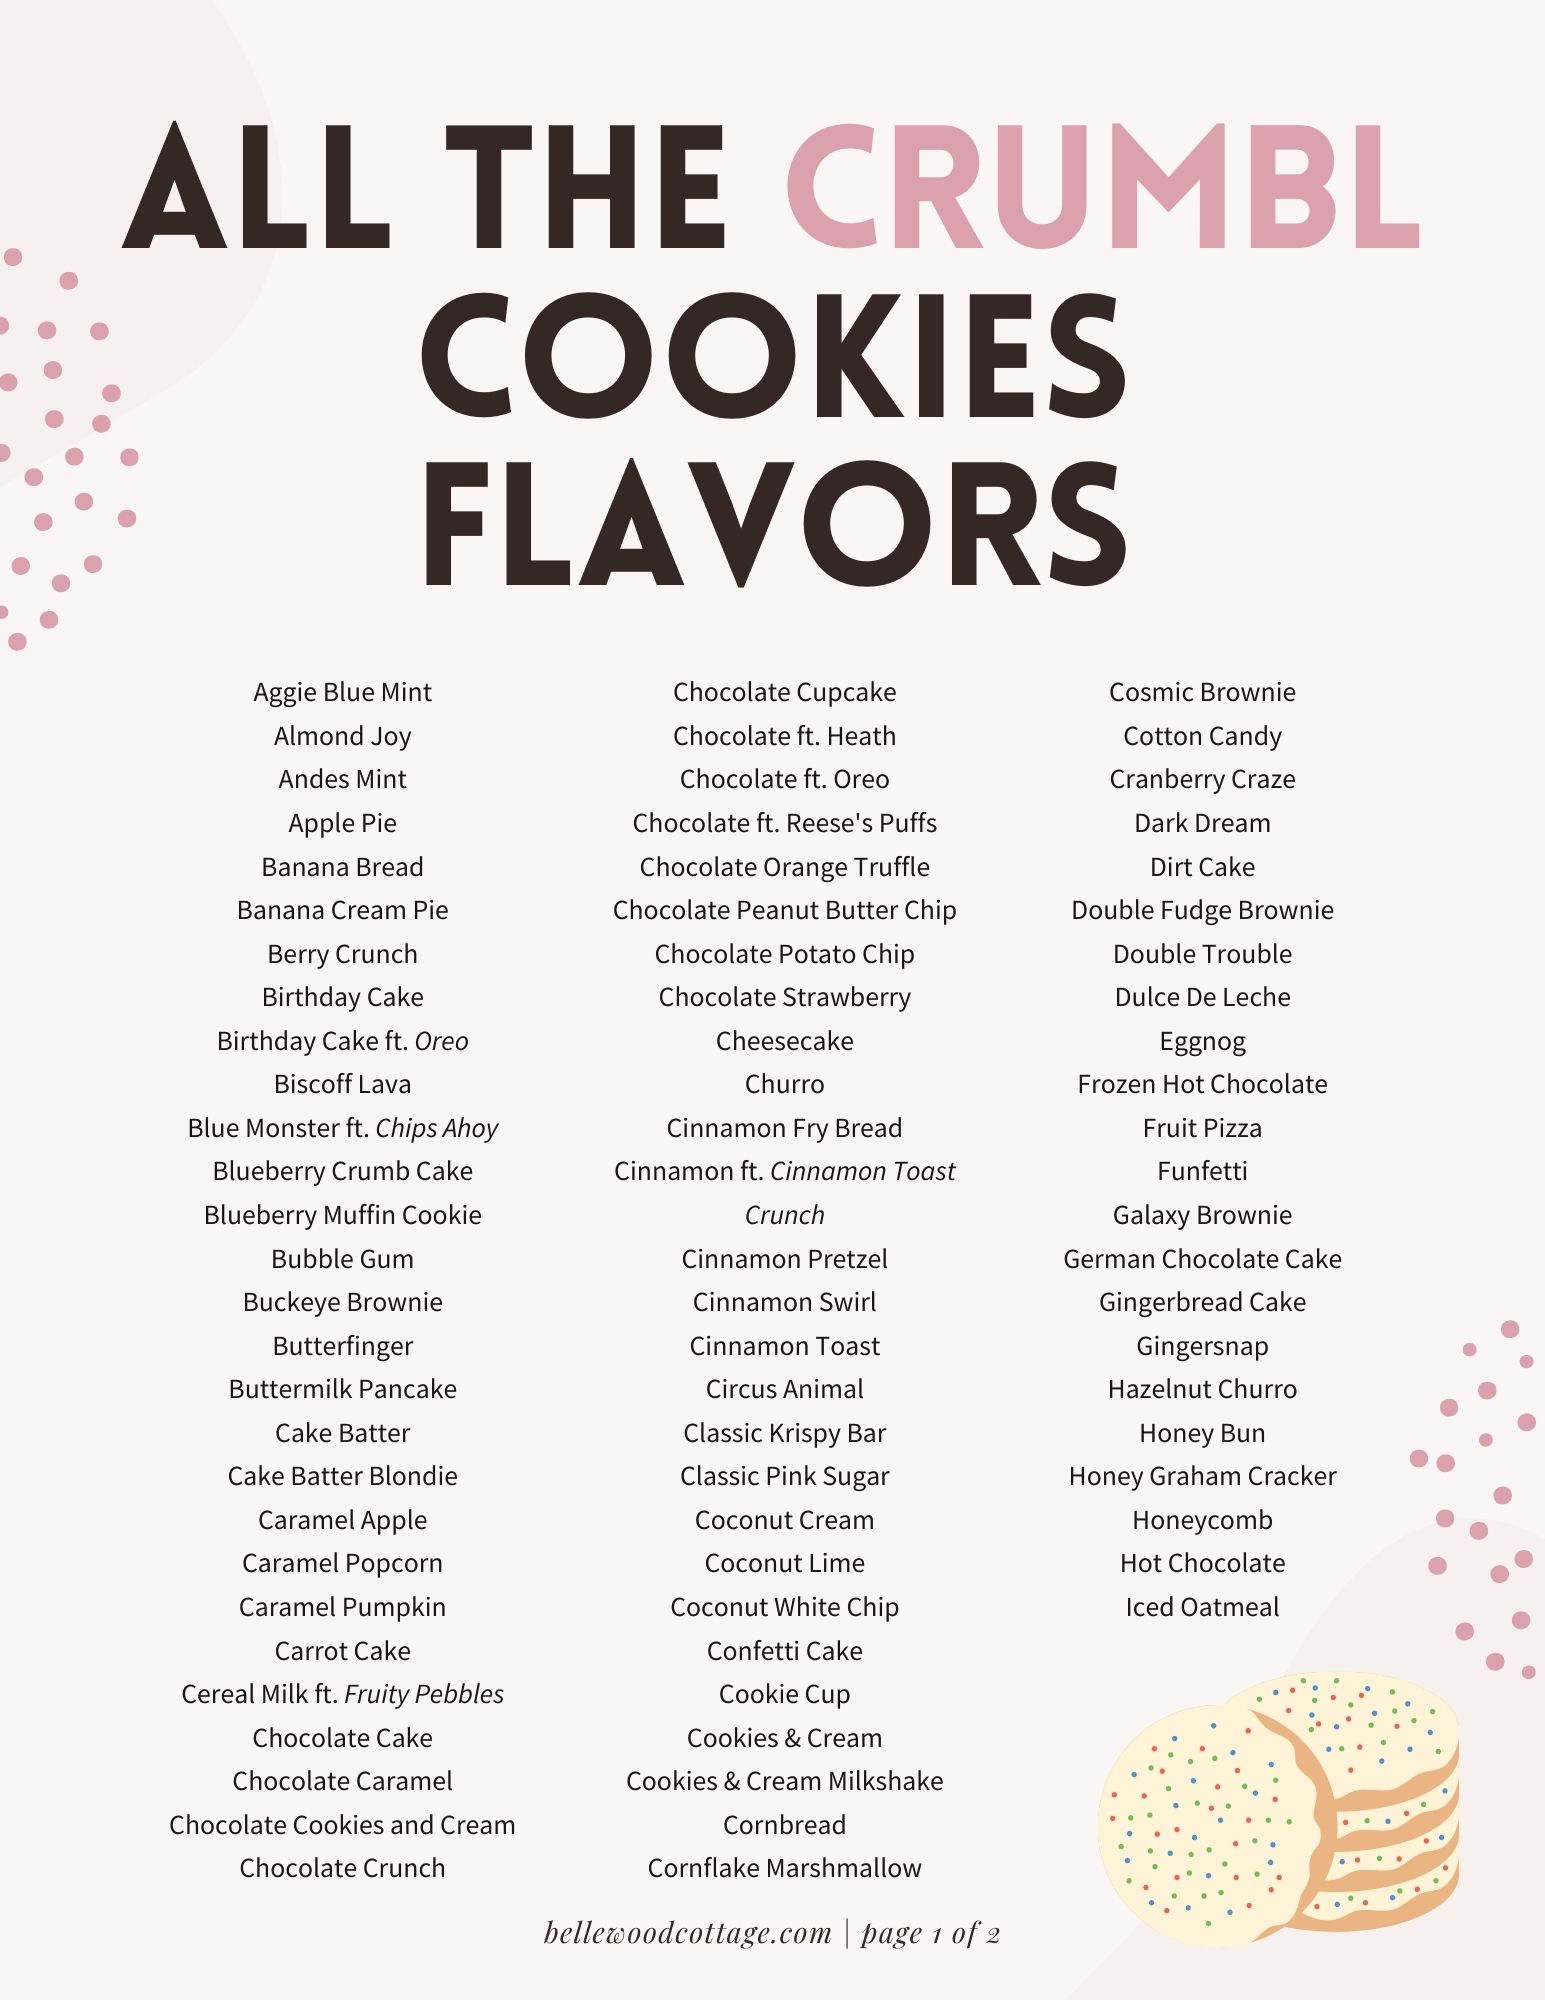 A jpeg image of a text list of all the Crumbl Cookie Flavors listed from Aggie Blue Mint to Iced Oatmeal.